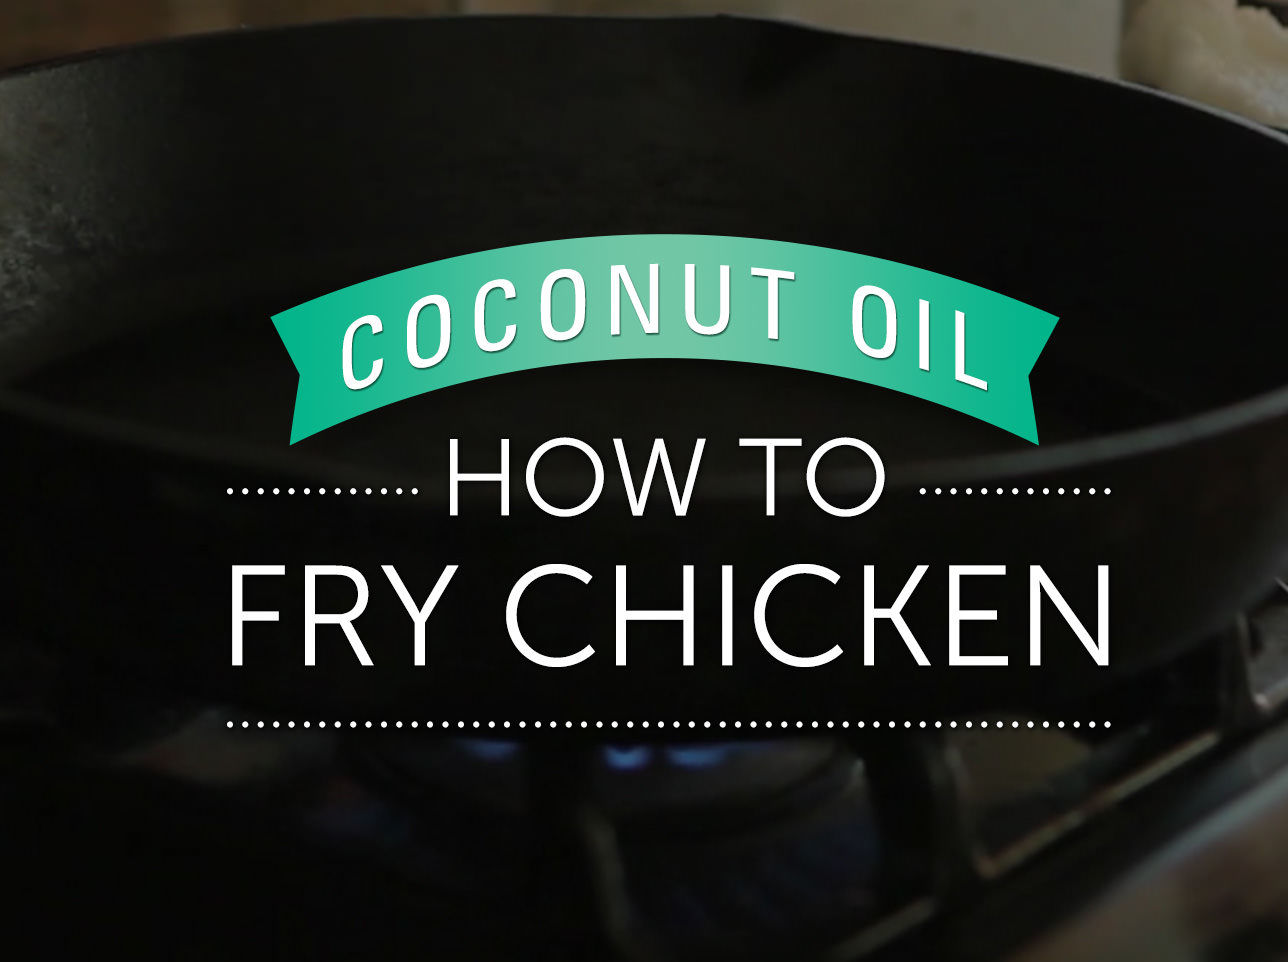 Learn how to fry chicken with LouAna Coconut Oil.